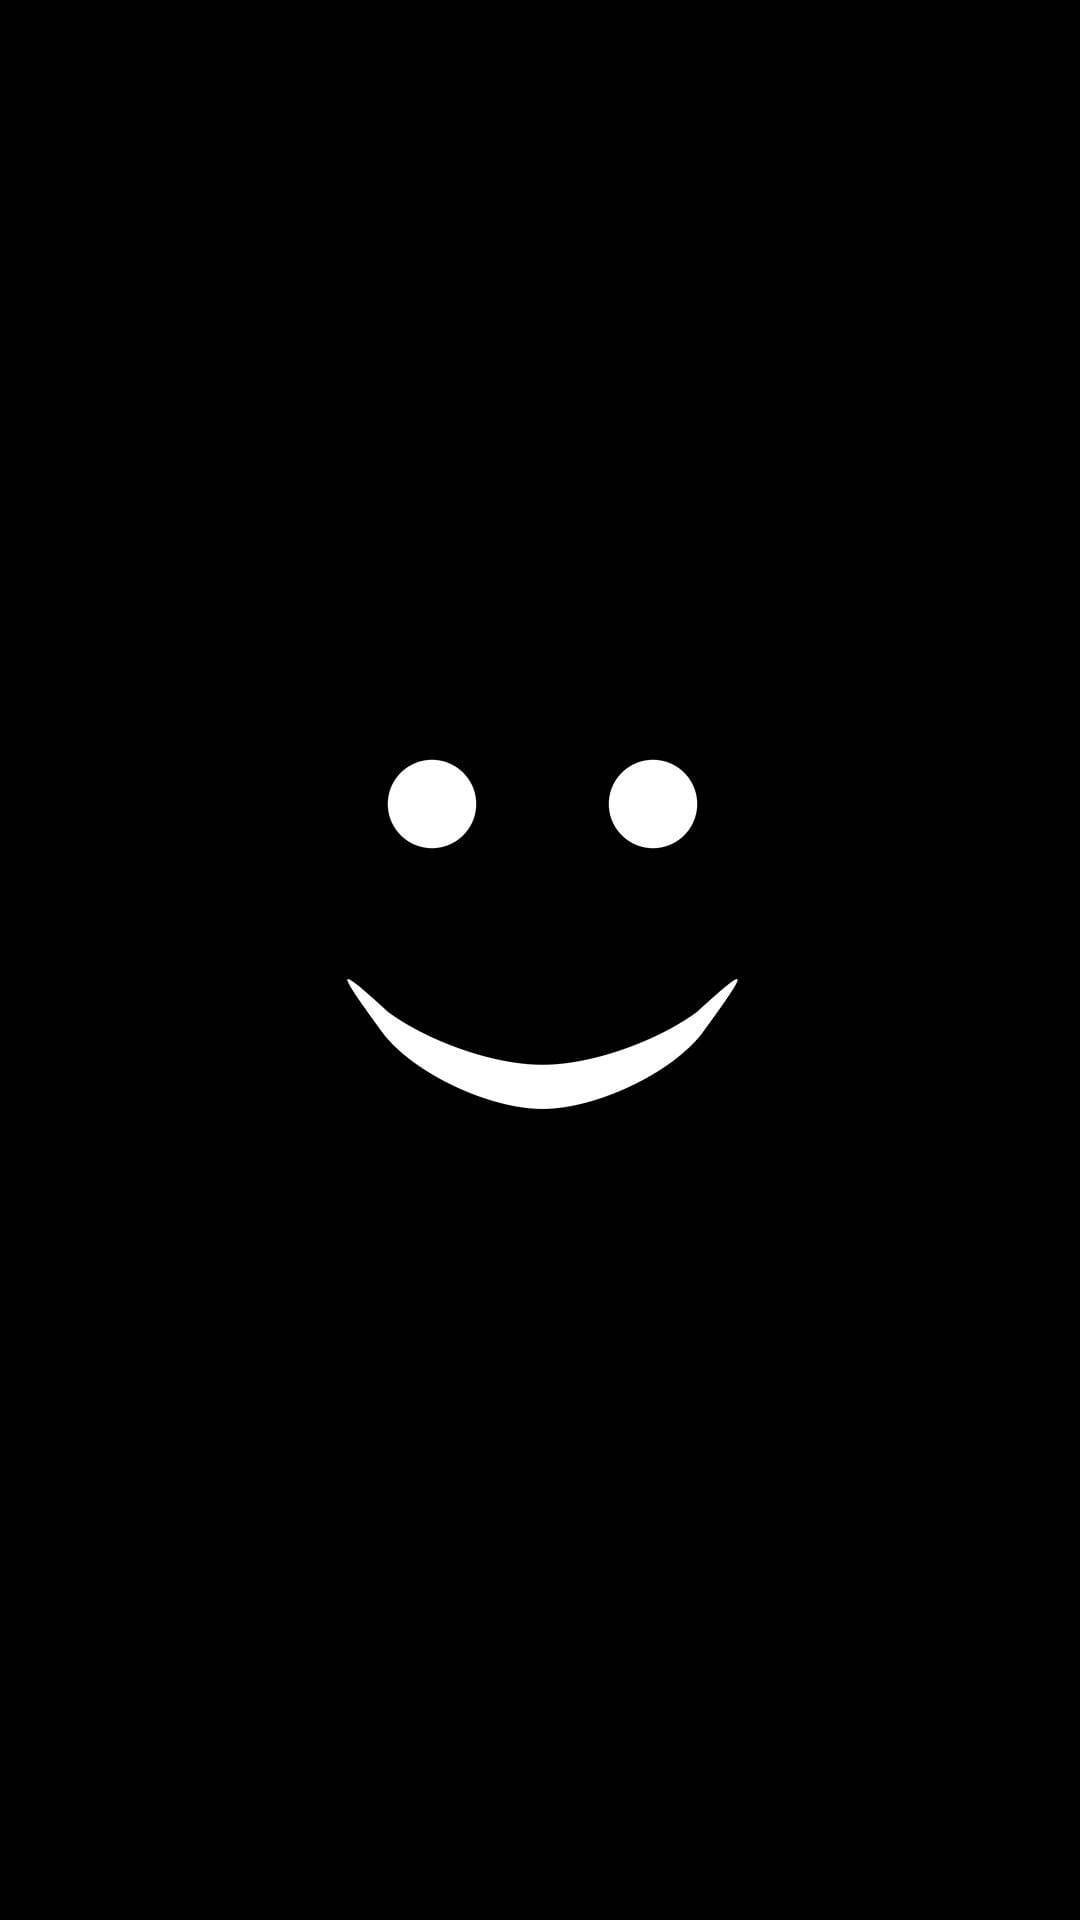 Smiley Face Samsung Black Picture